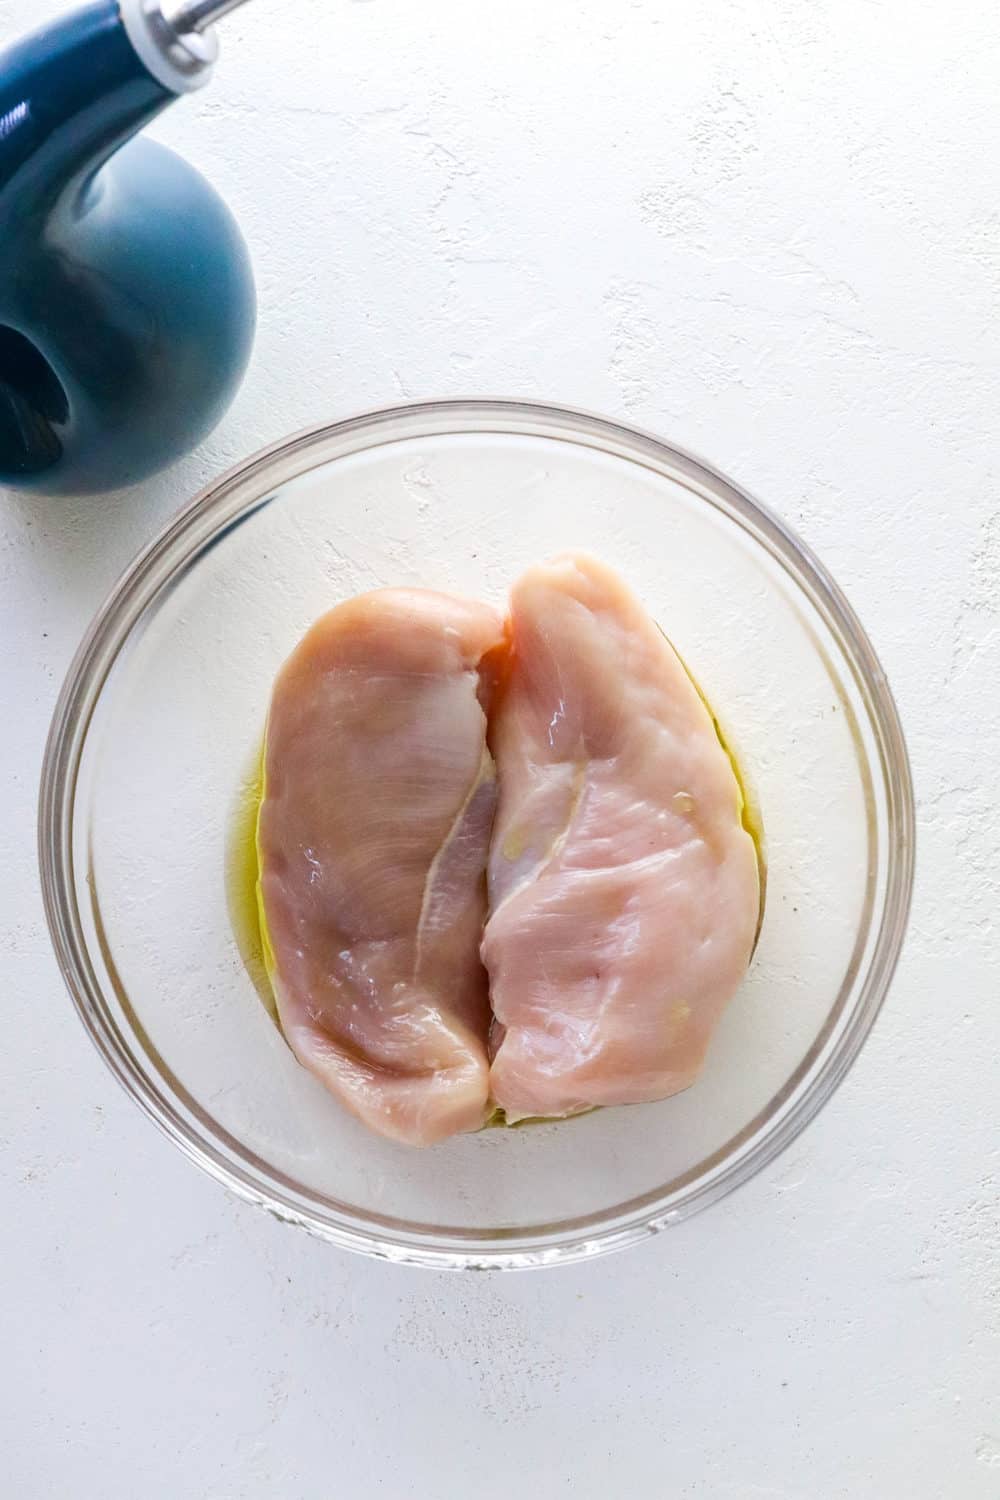 Two pieces of raw boneless chicken breast in a round glass bowl with olive oil on them